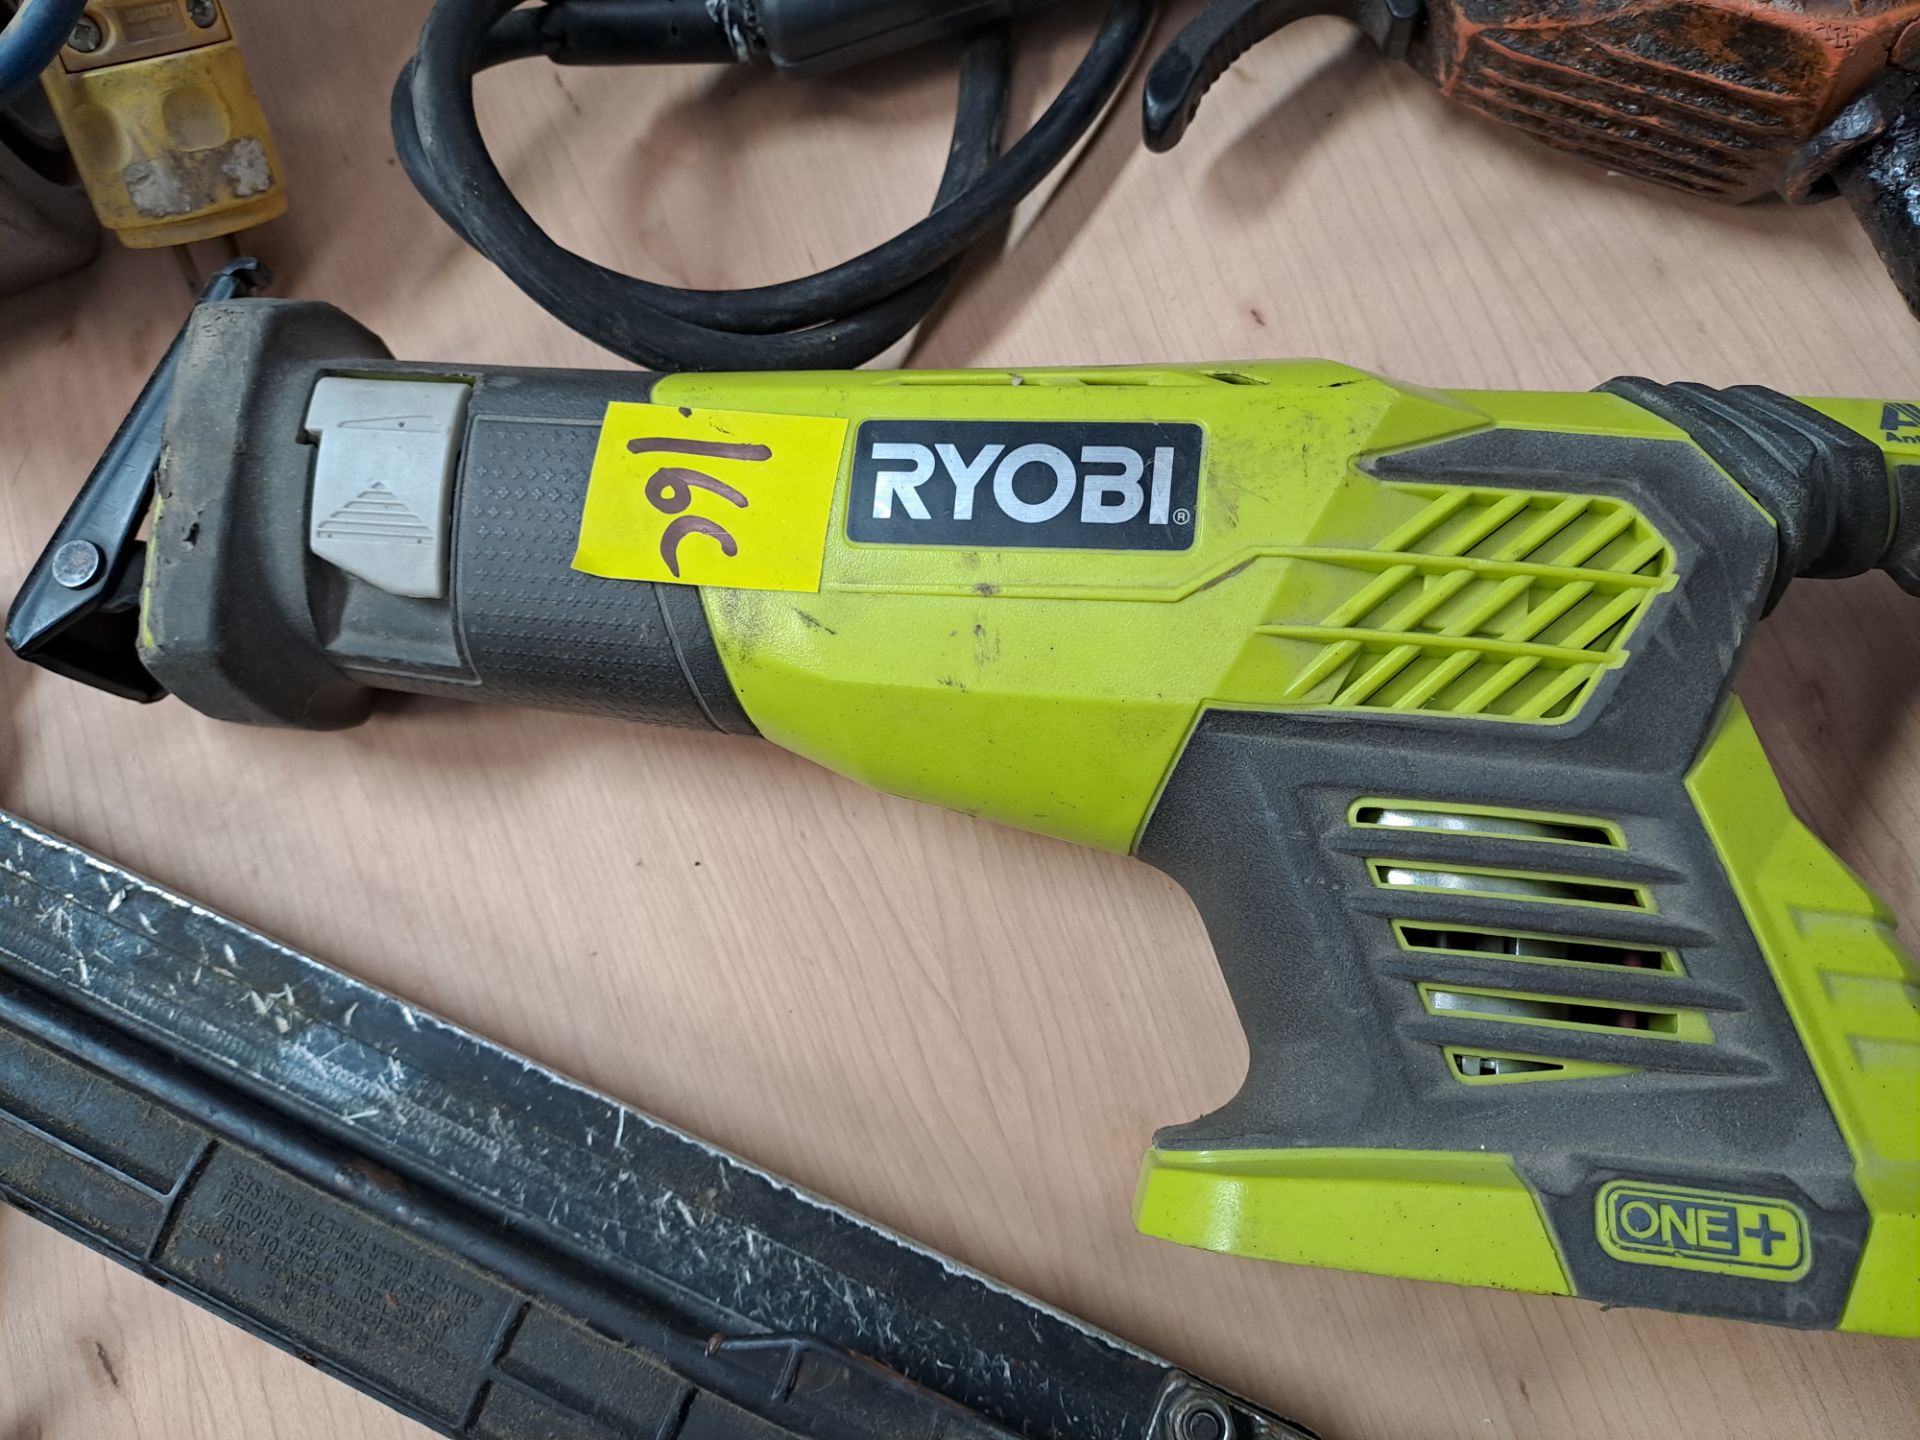 Lot of 4 pieces contains: 1 Porter electric sander with dust collector; 1 Ryobi wood saw without ba - Image 7 of 14